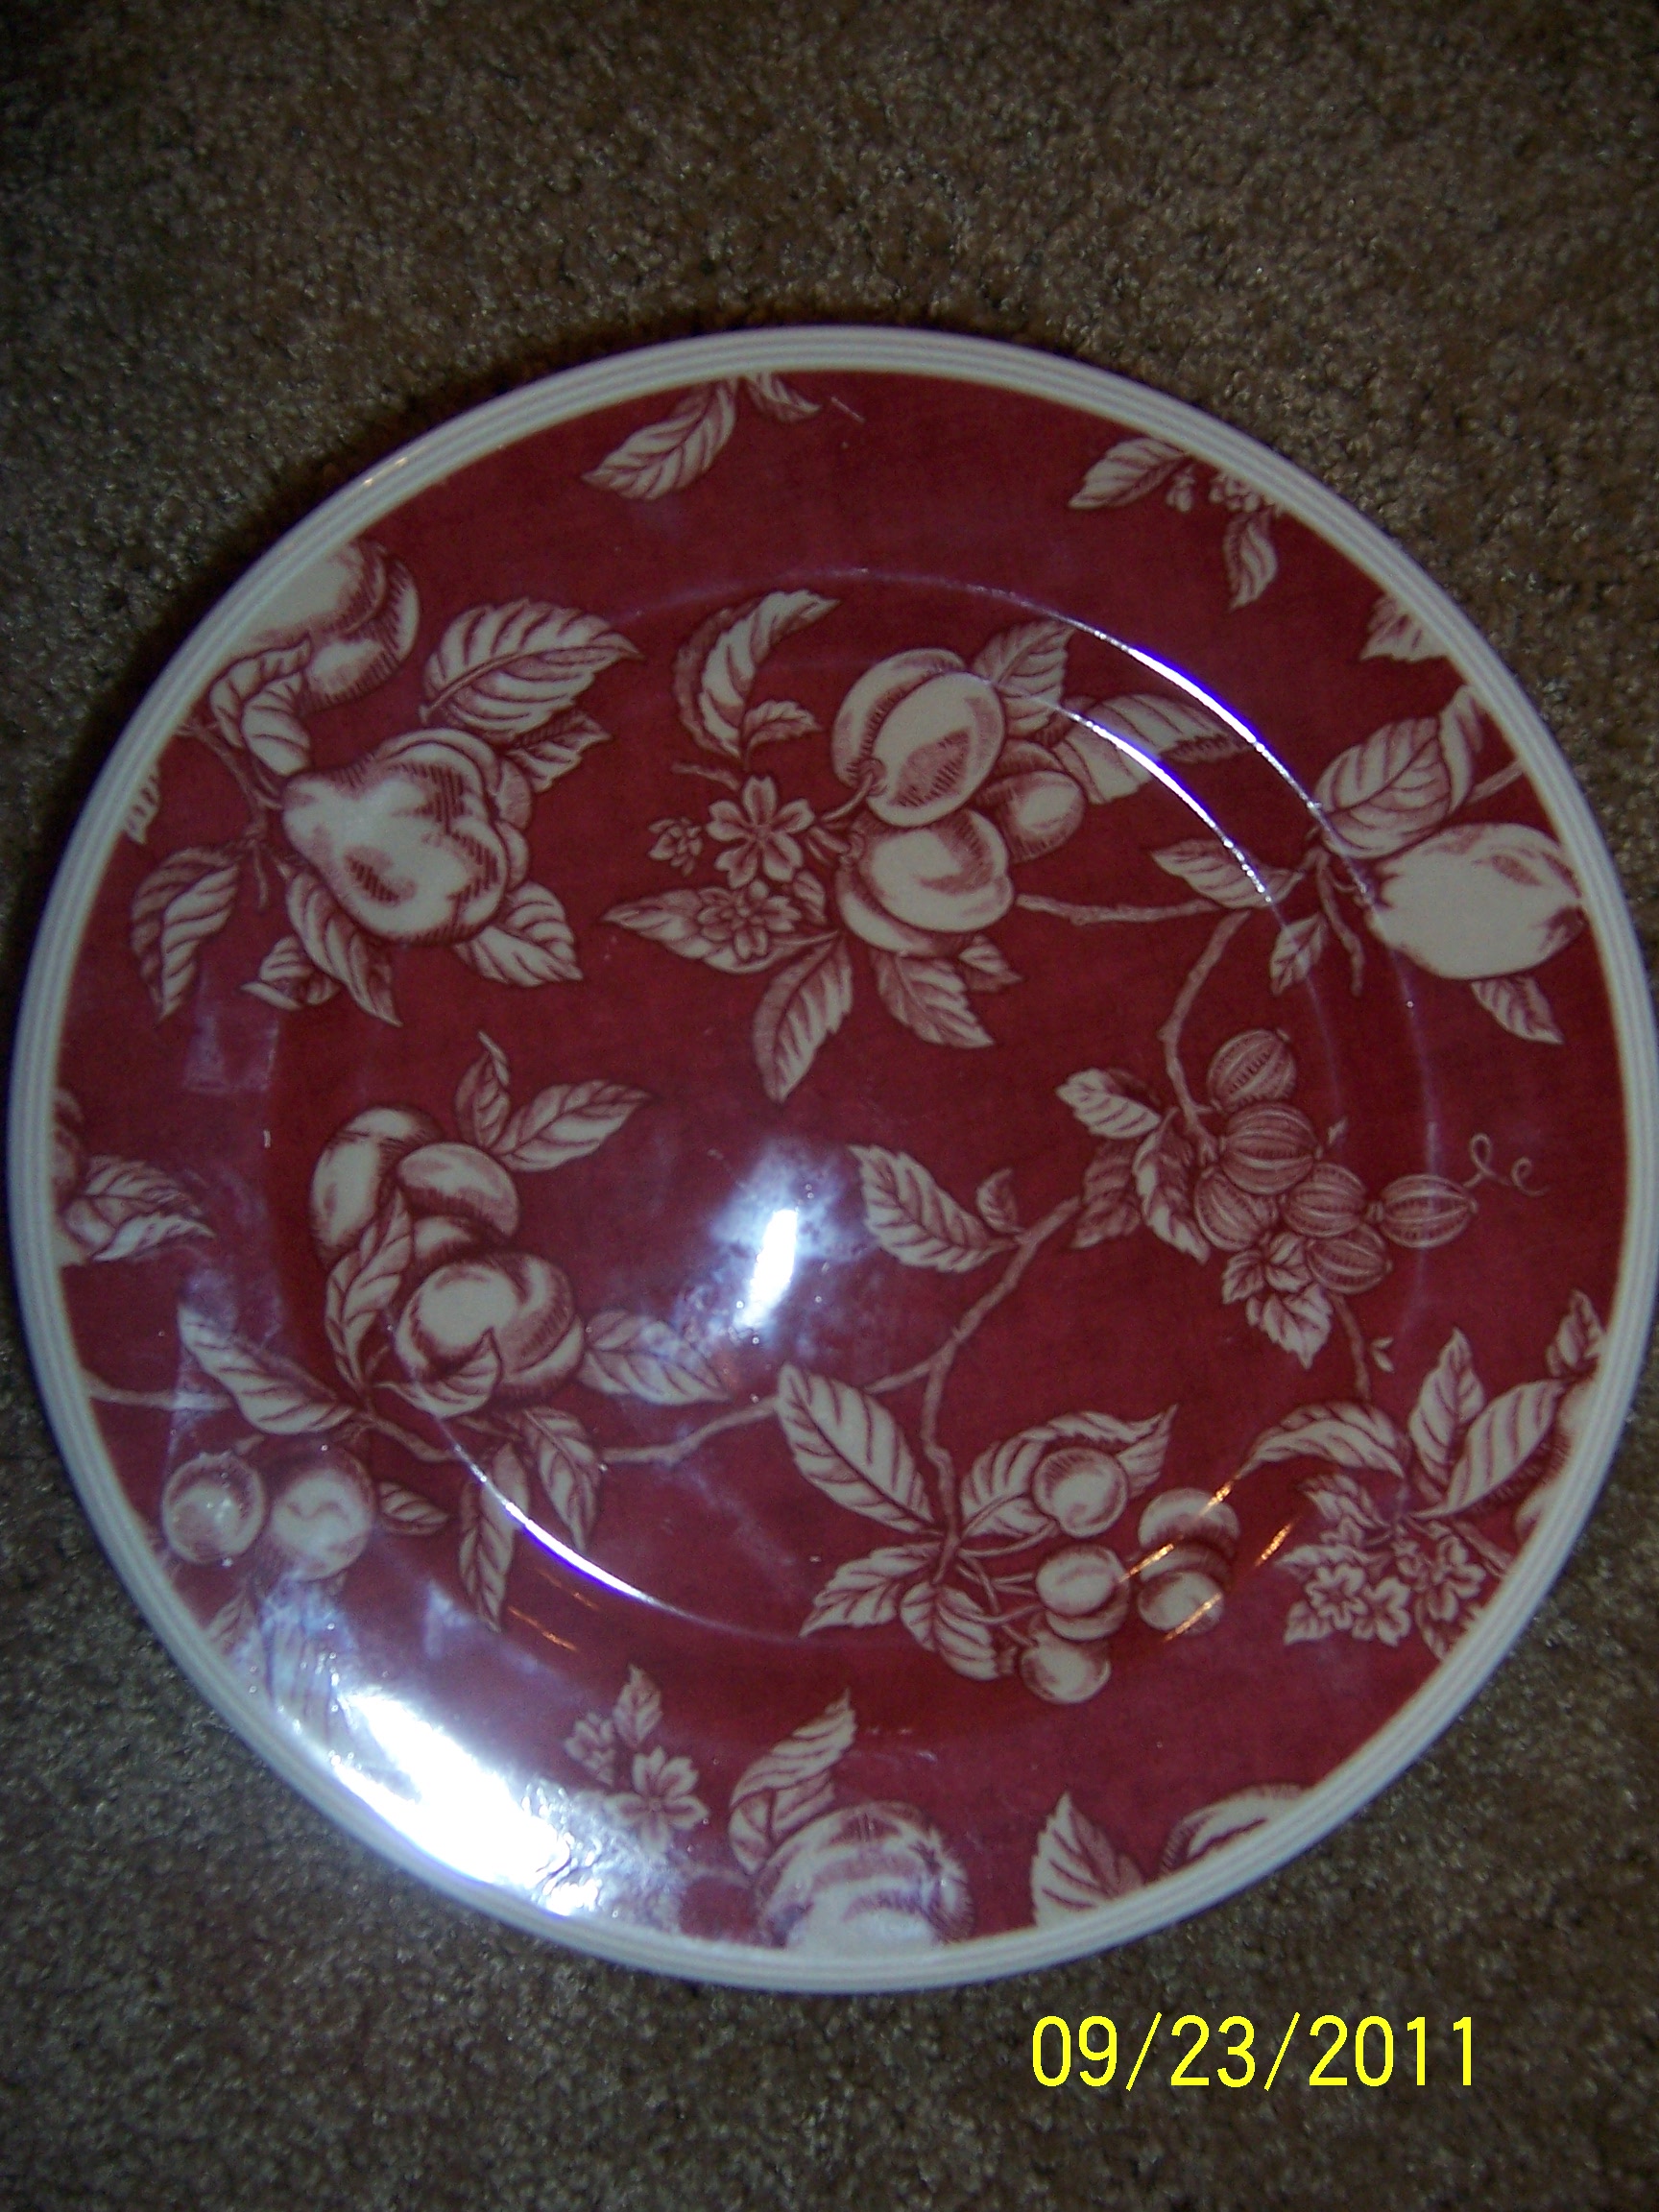 5 - 81/4\" waverly garden room fruit toile plates from